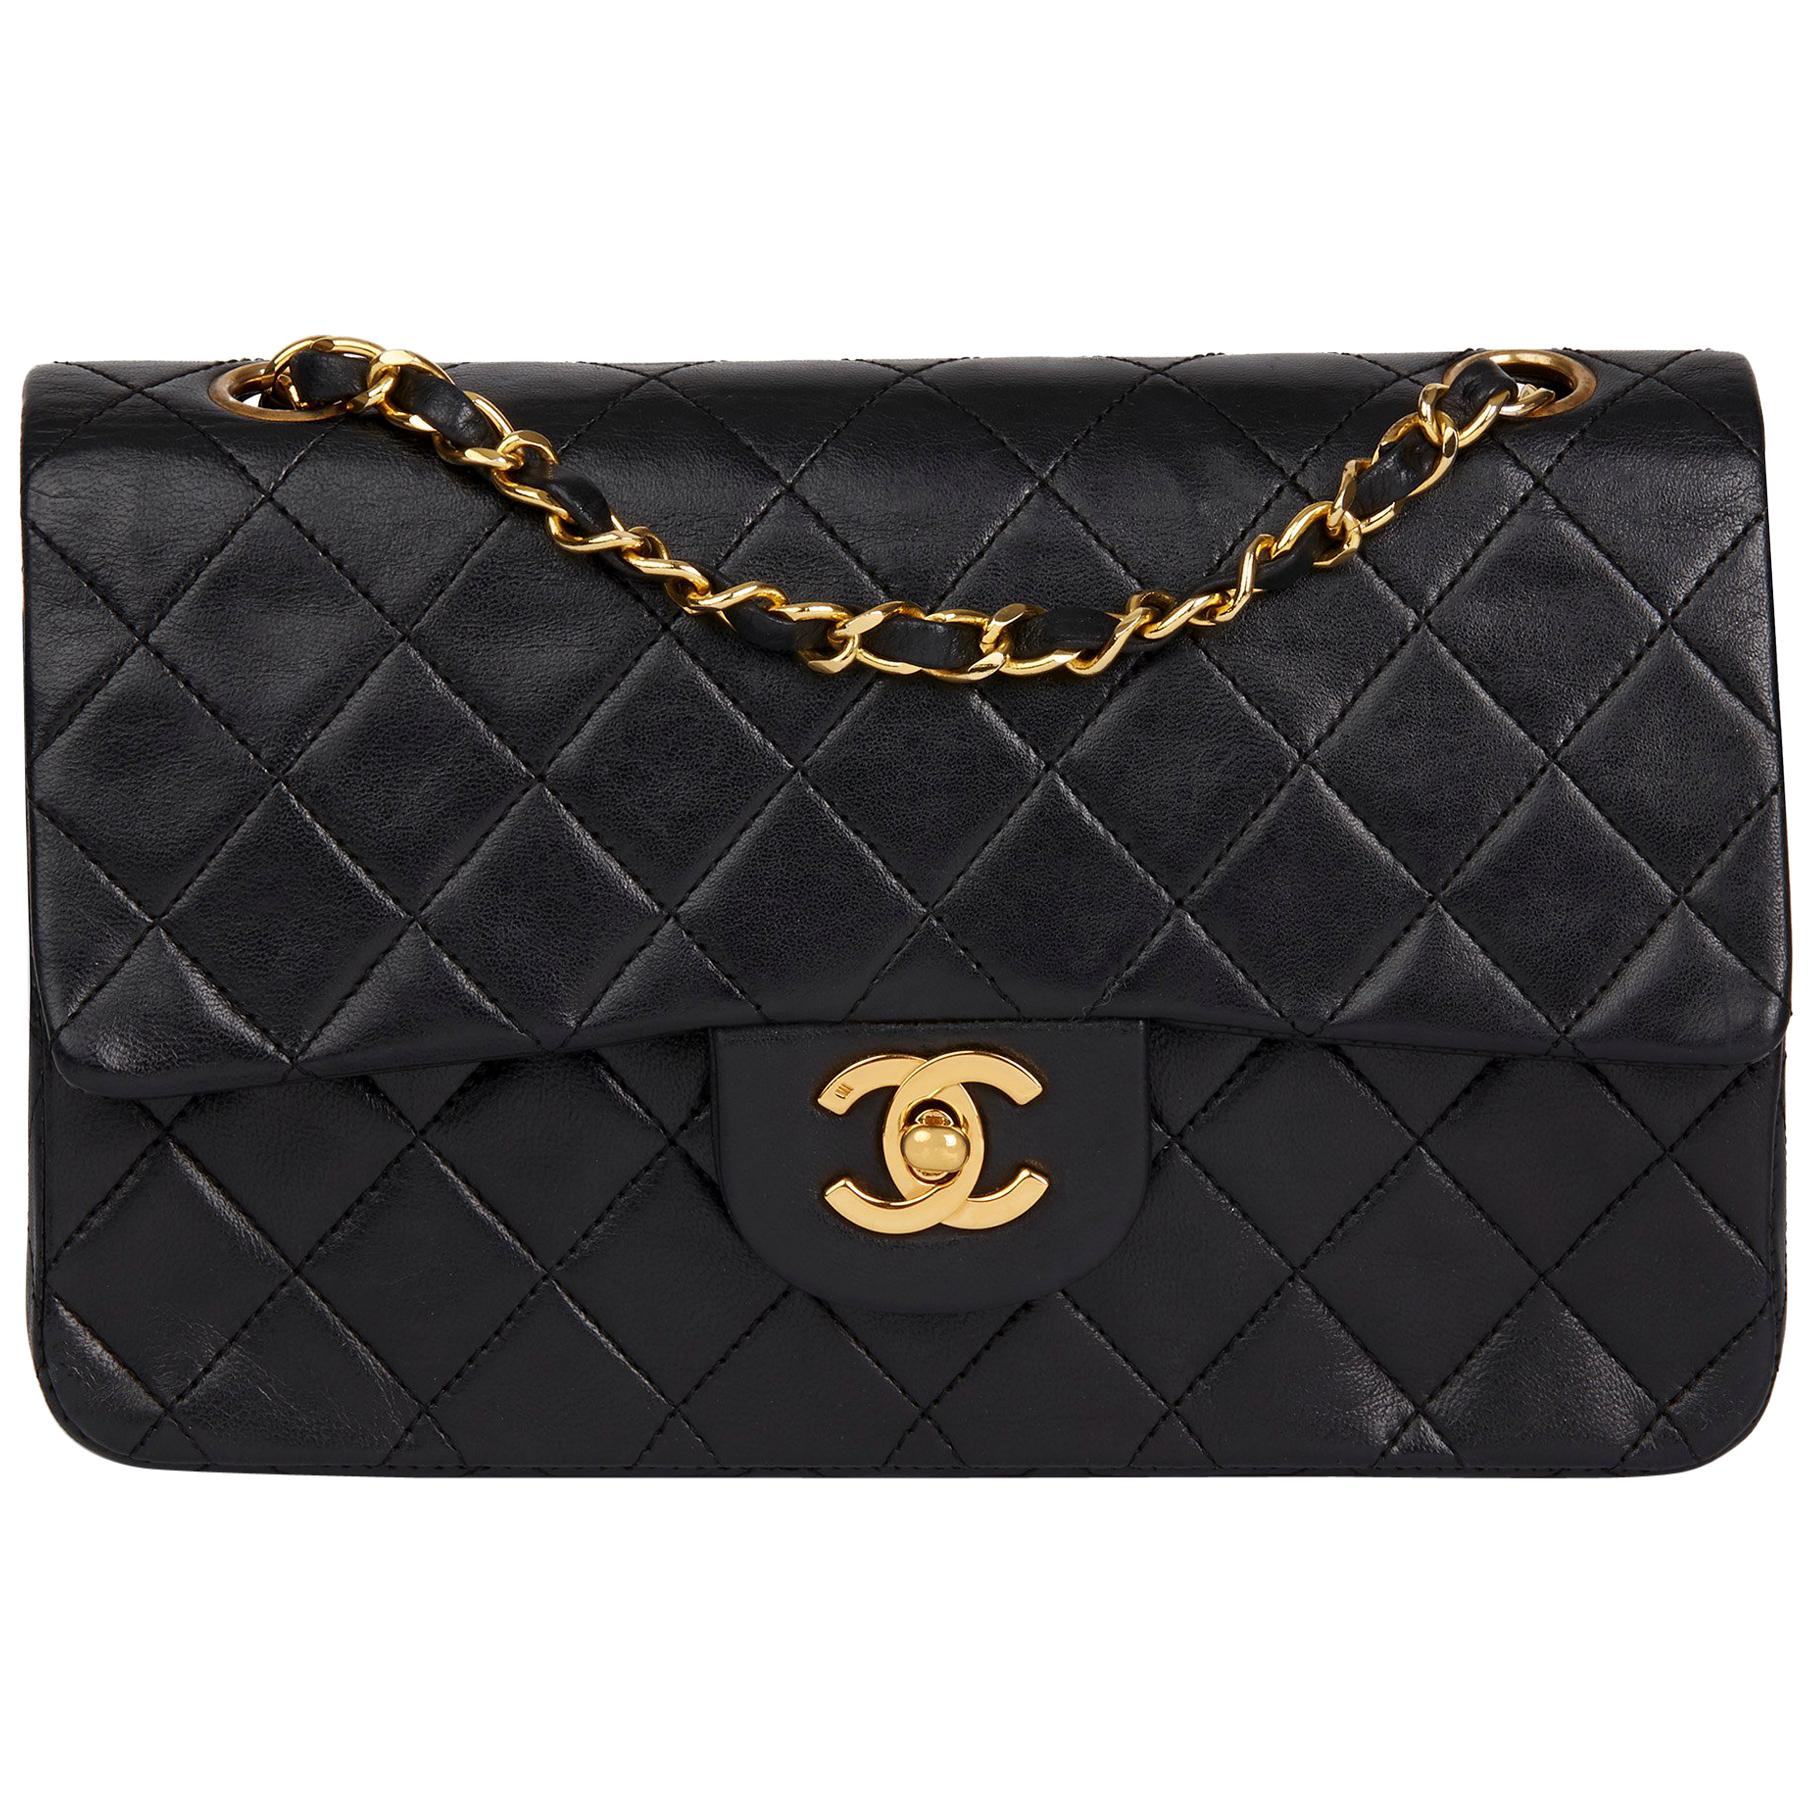 1989 Chanel Black Quilted Lambskin Vintage Small Classic Double Flap Bag